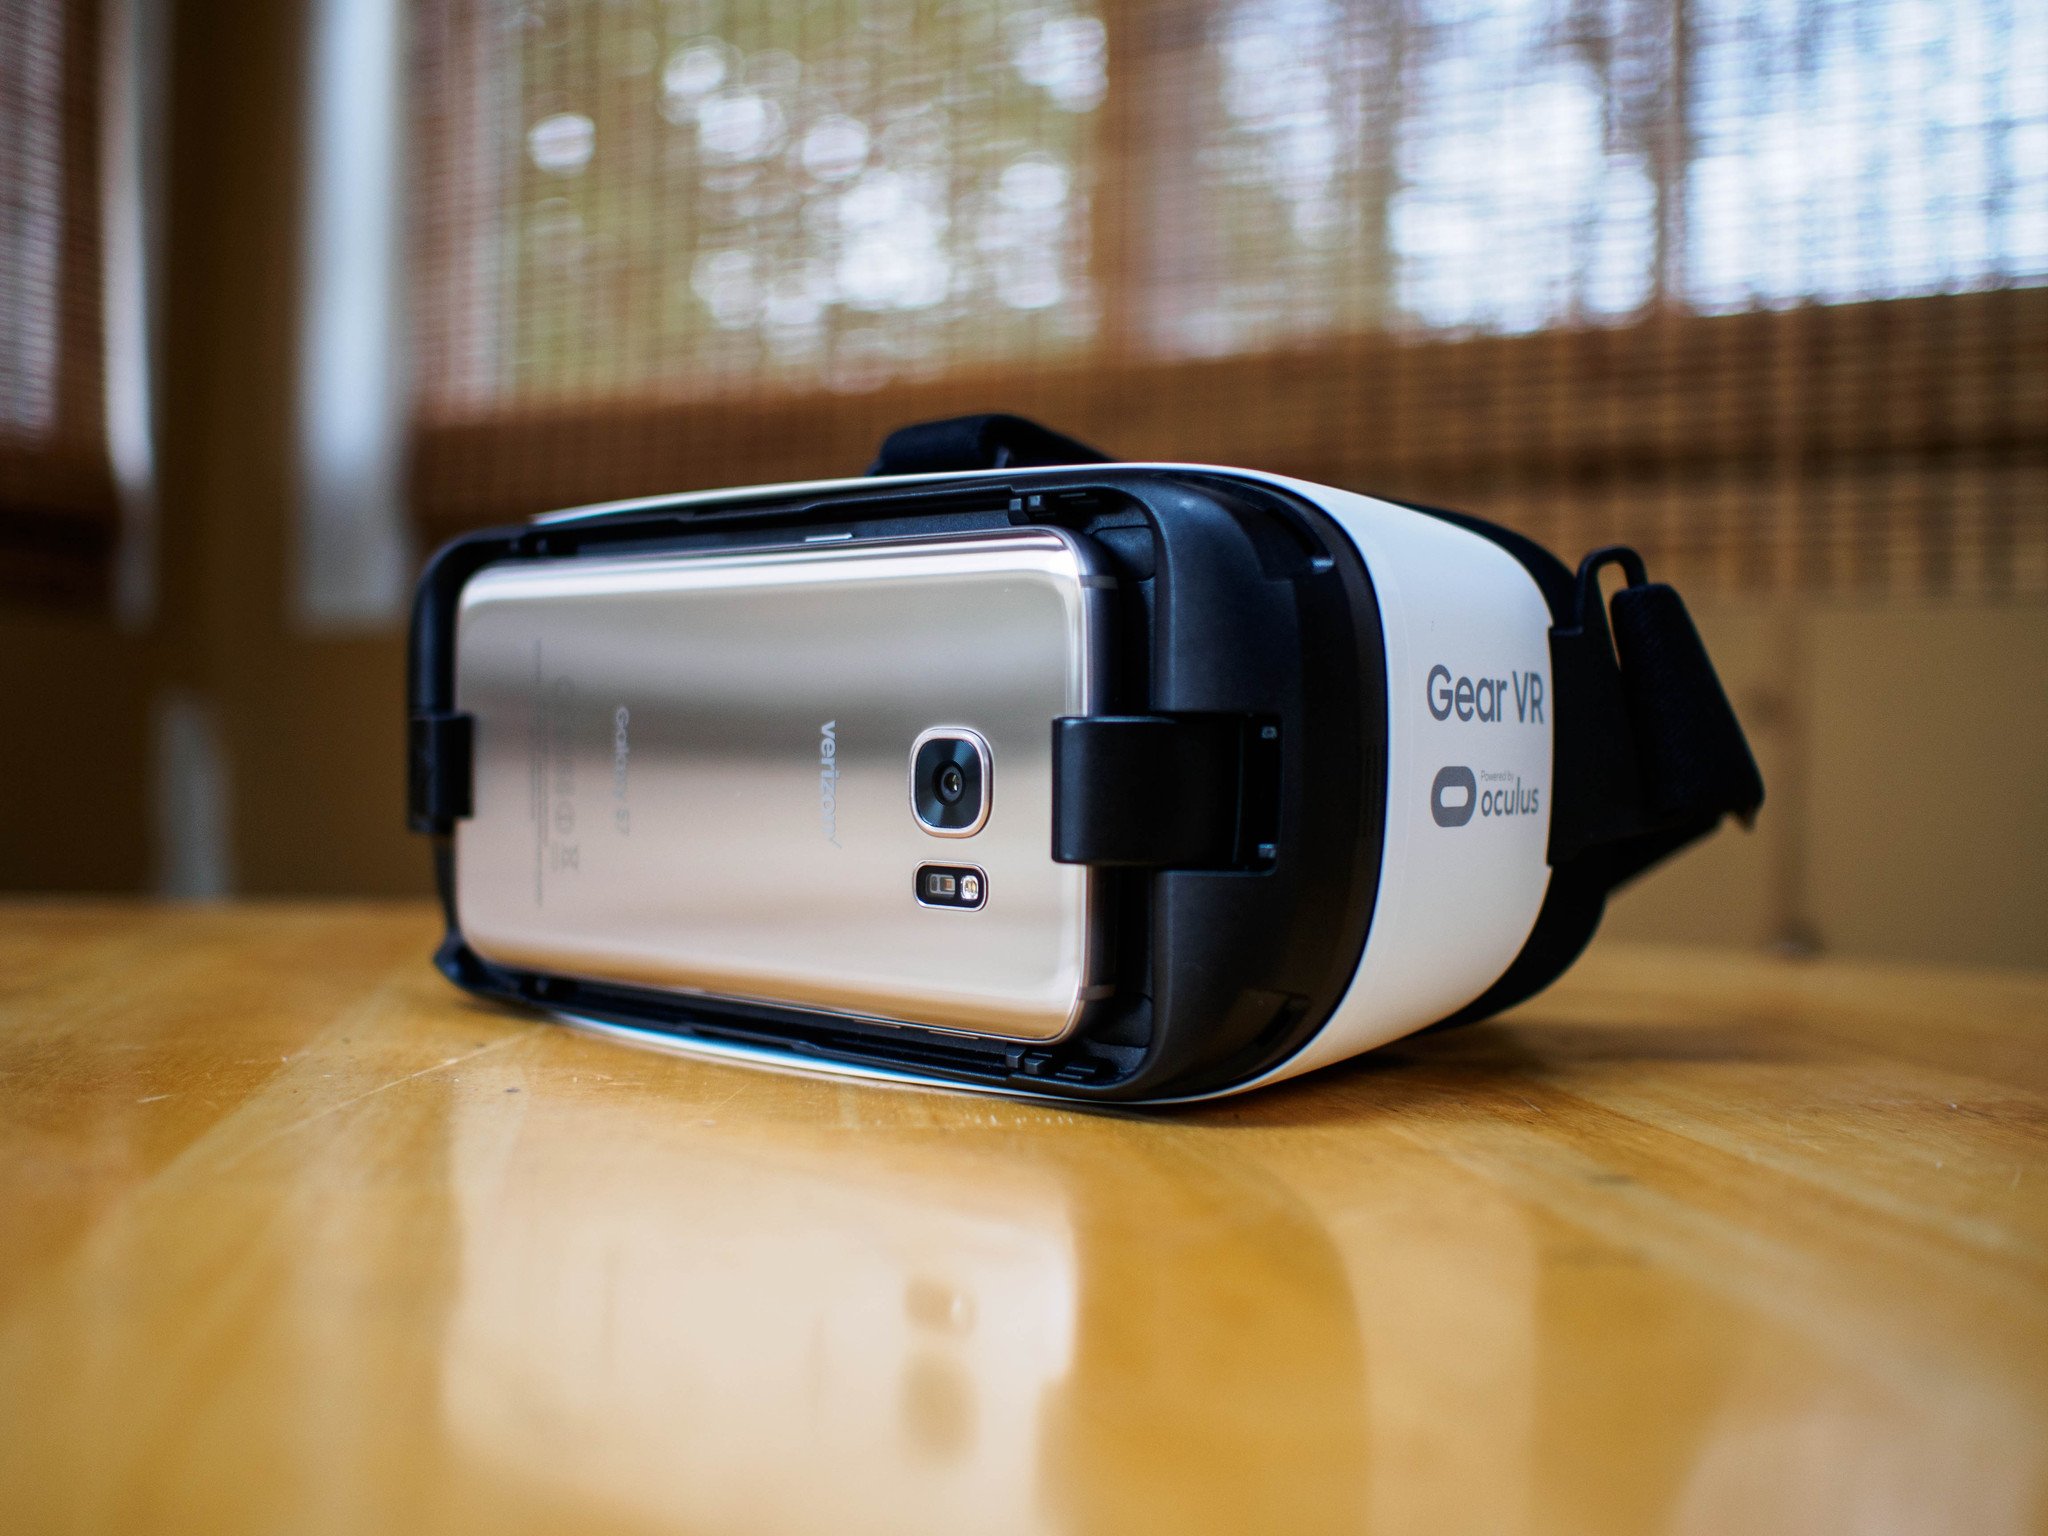 The Galaxy S7 and Gear VR make virtual 